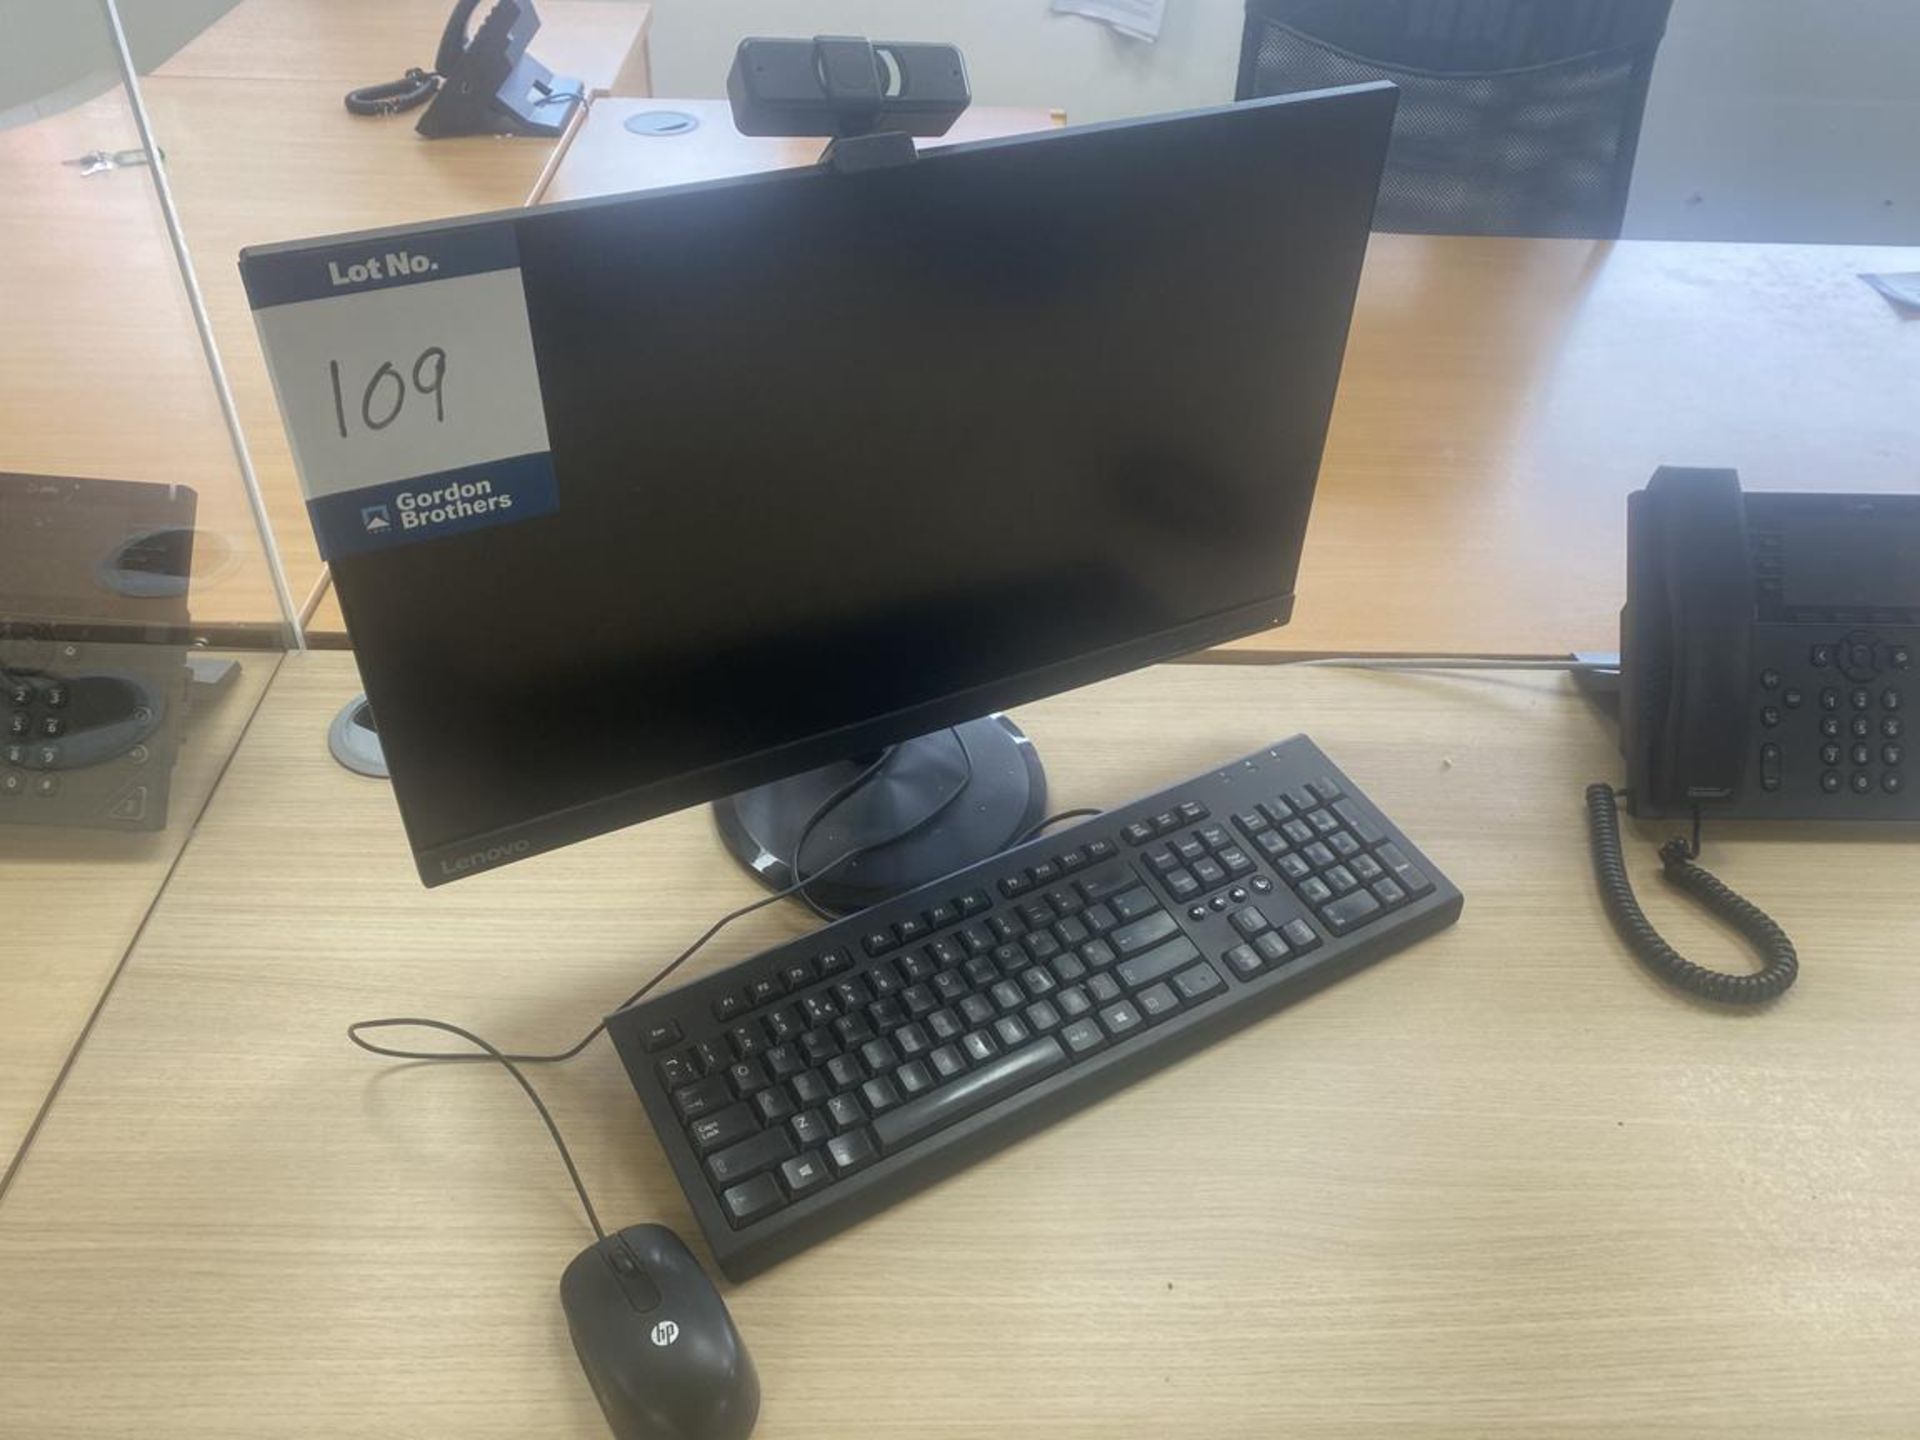 HP Intel core i5 tower PC , Samsung S24D330 flat panel monitor and webcam , Keyboard and mouse